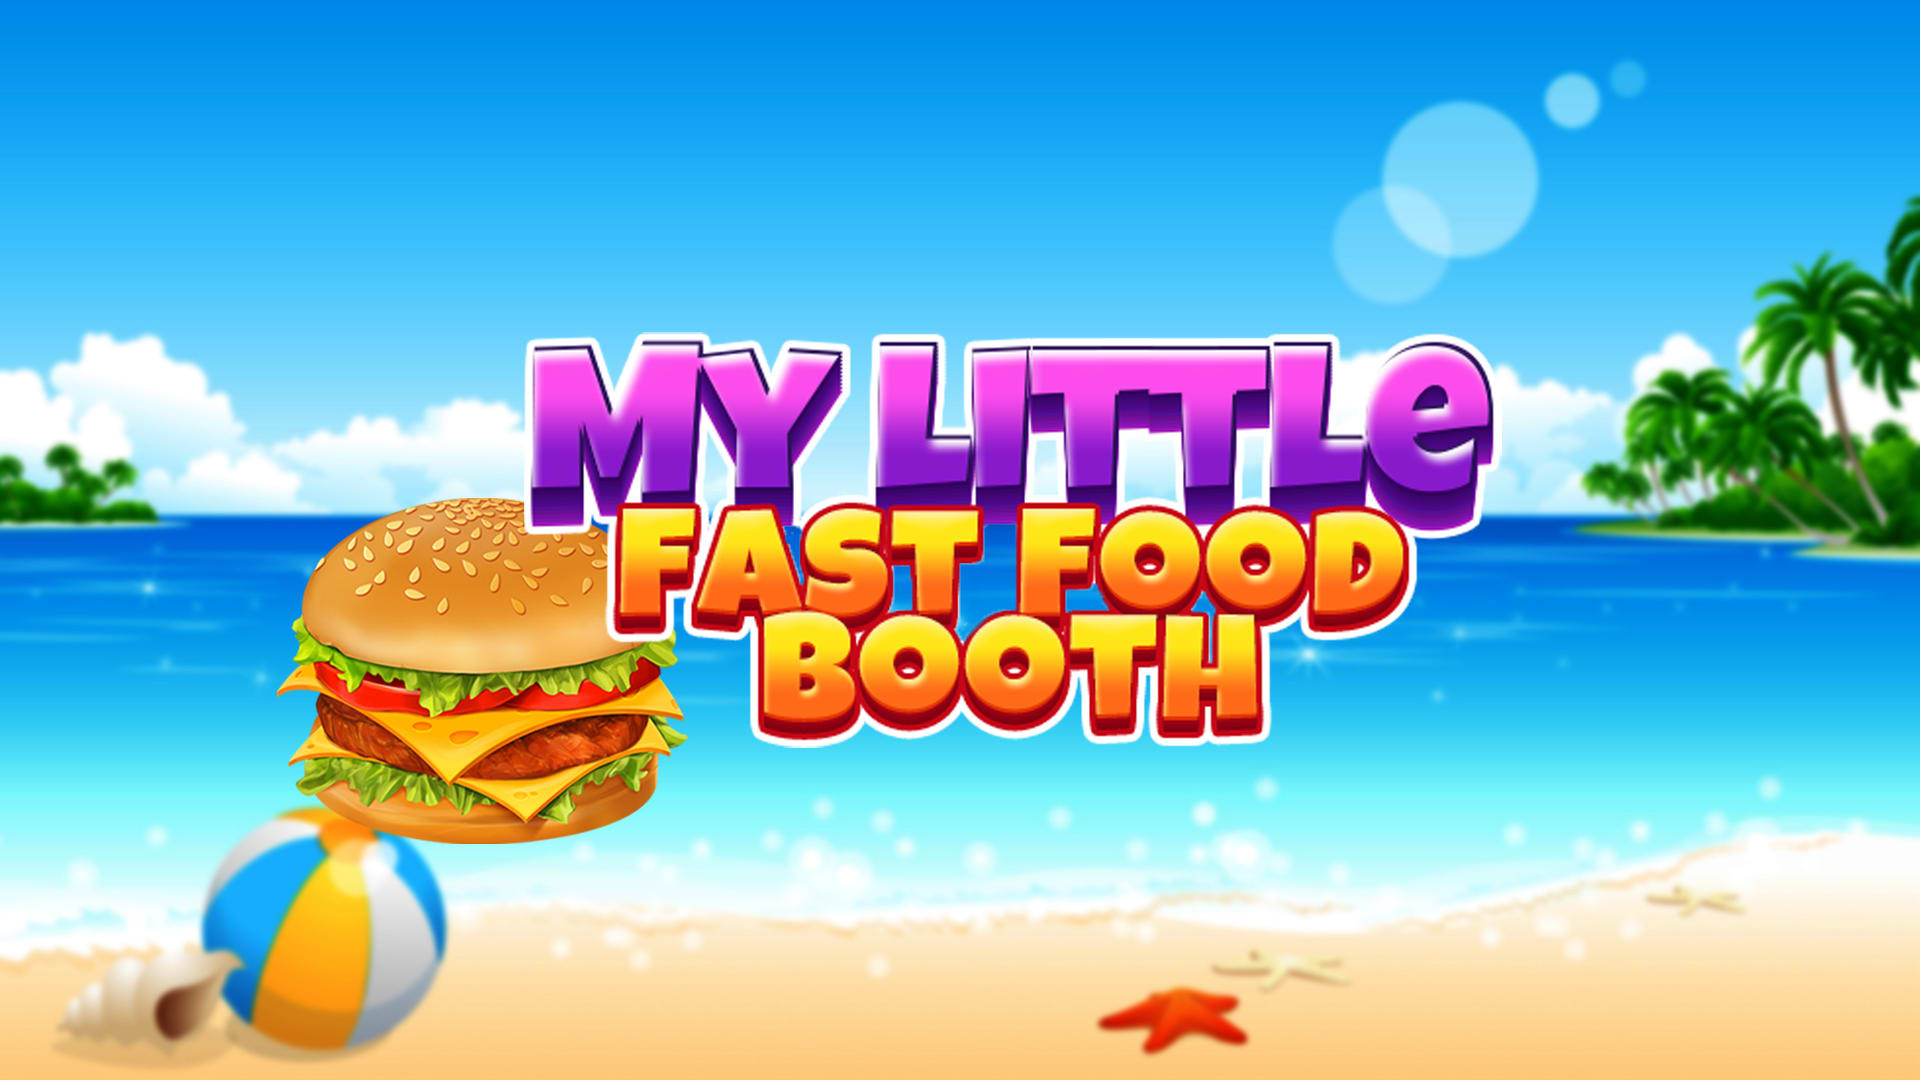 My little fast food booth